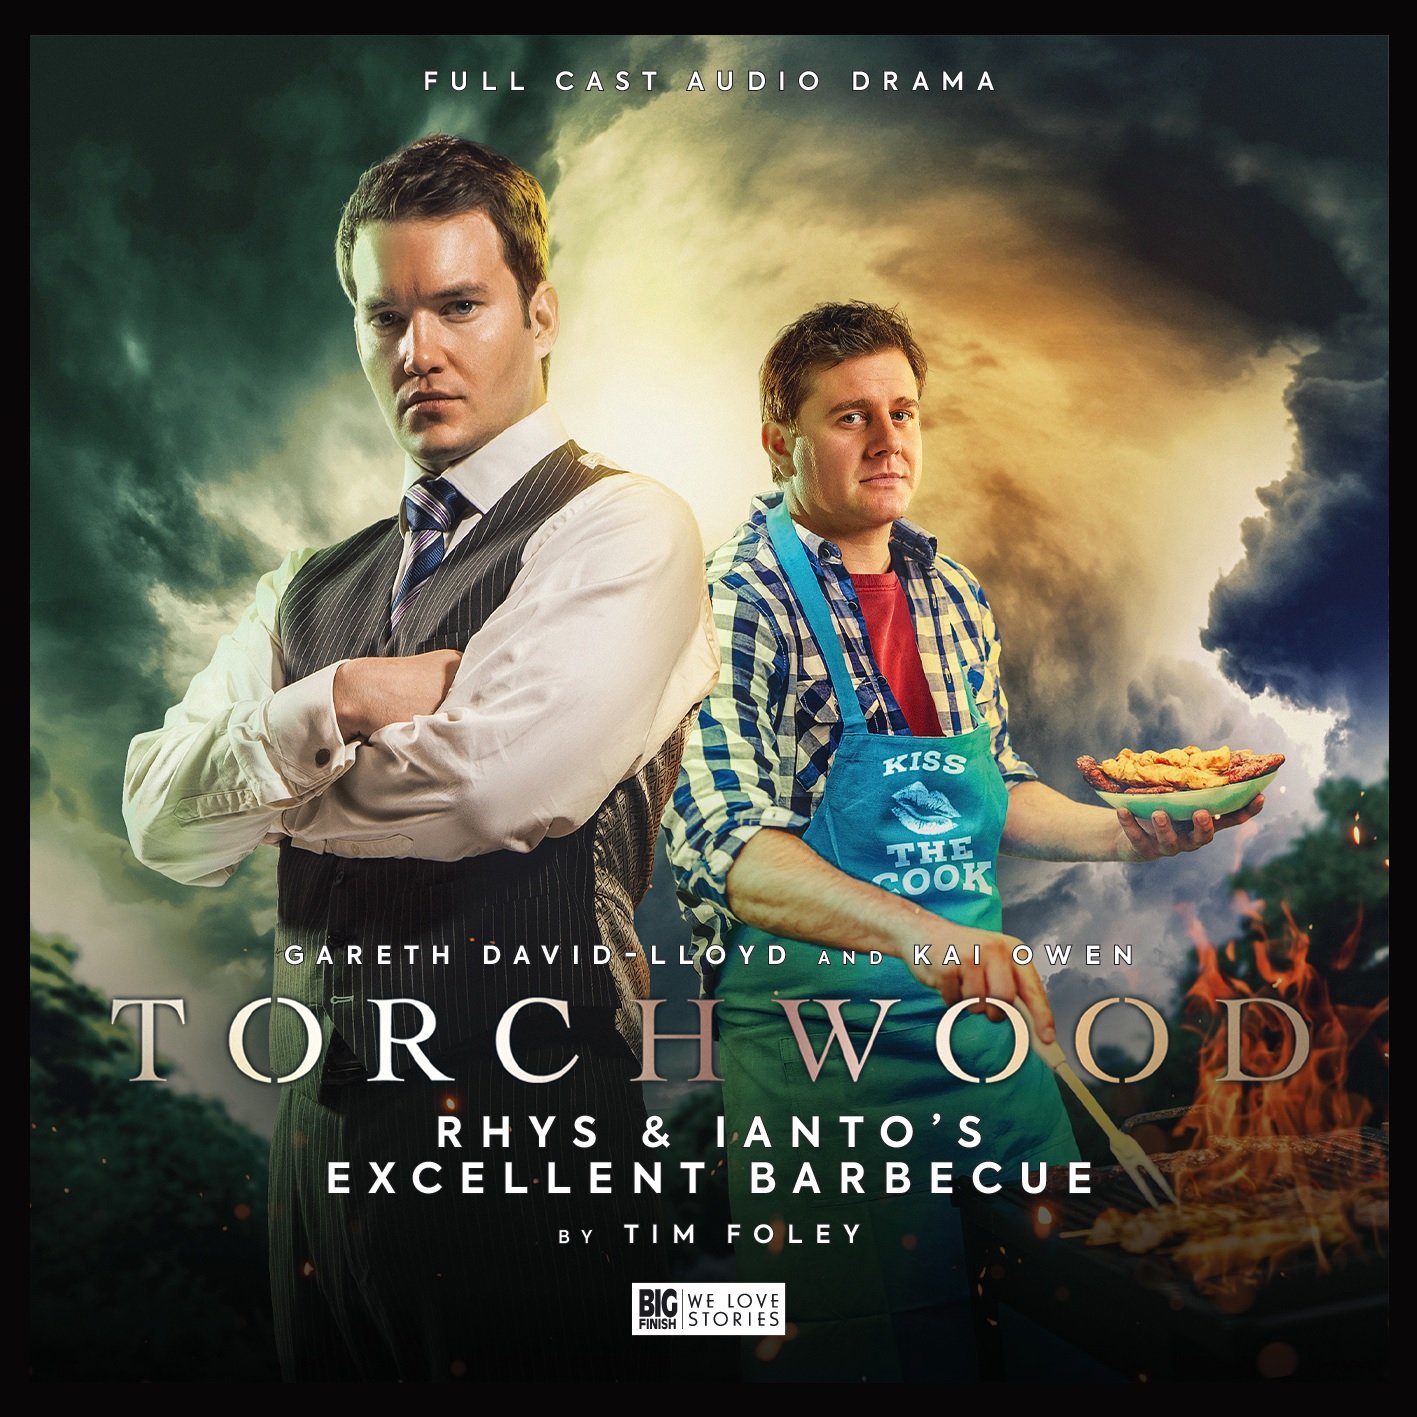 Reviewed: Big Finish’s Torchwood – Rhys and Ianto’s Excellent Barbecue